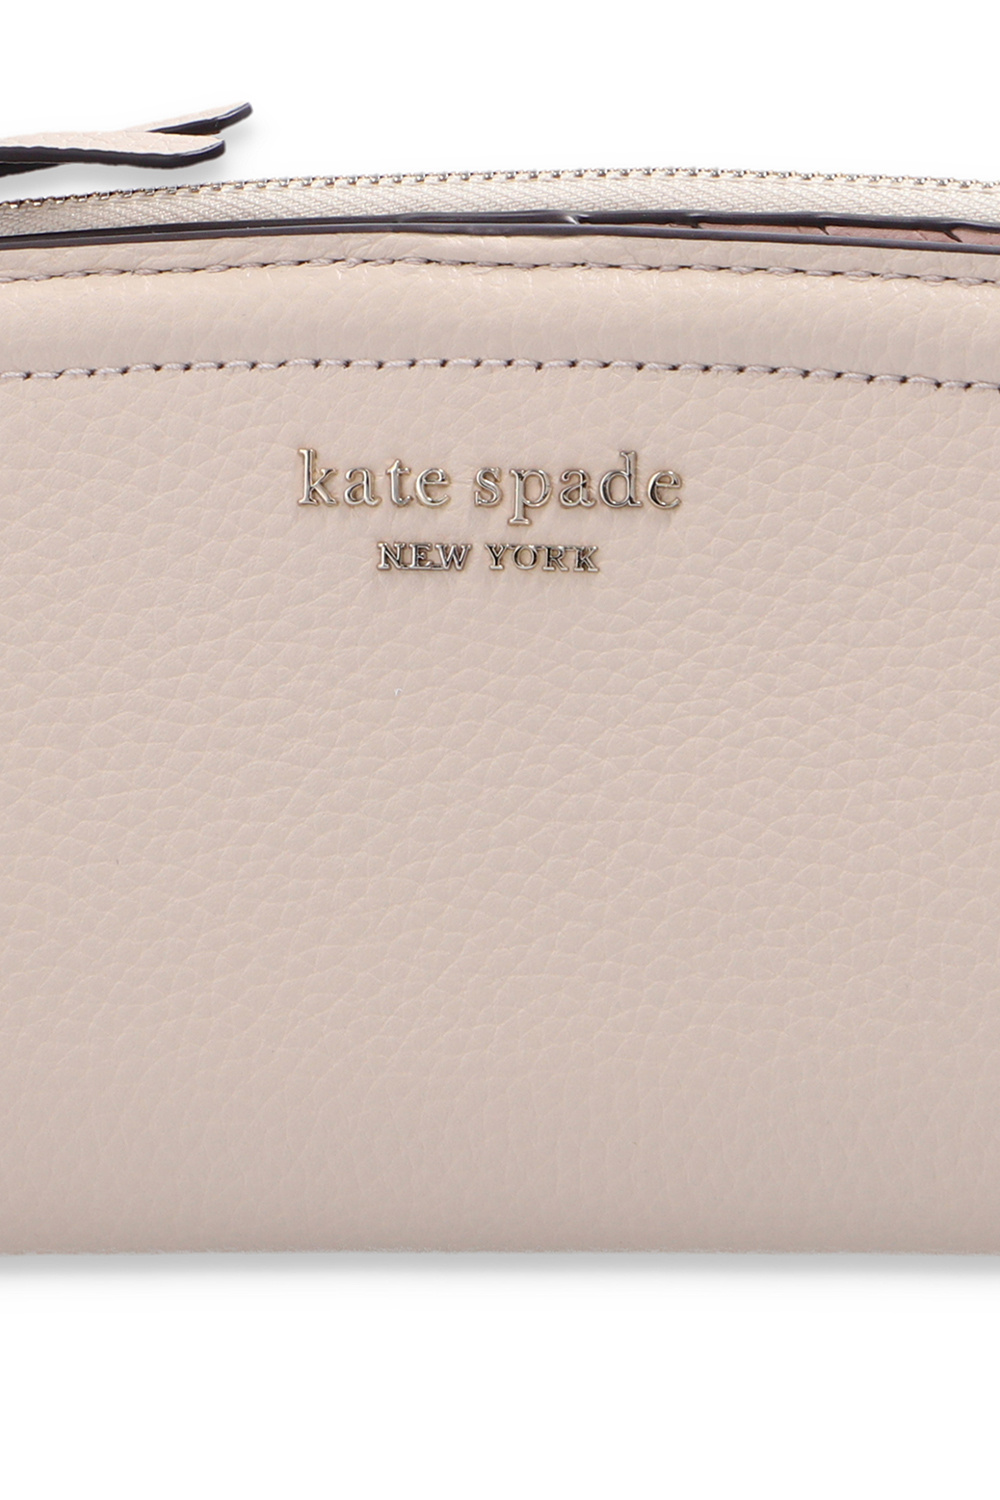 Kate Spade Leather wallet with logo